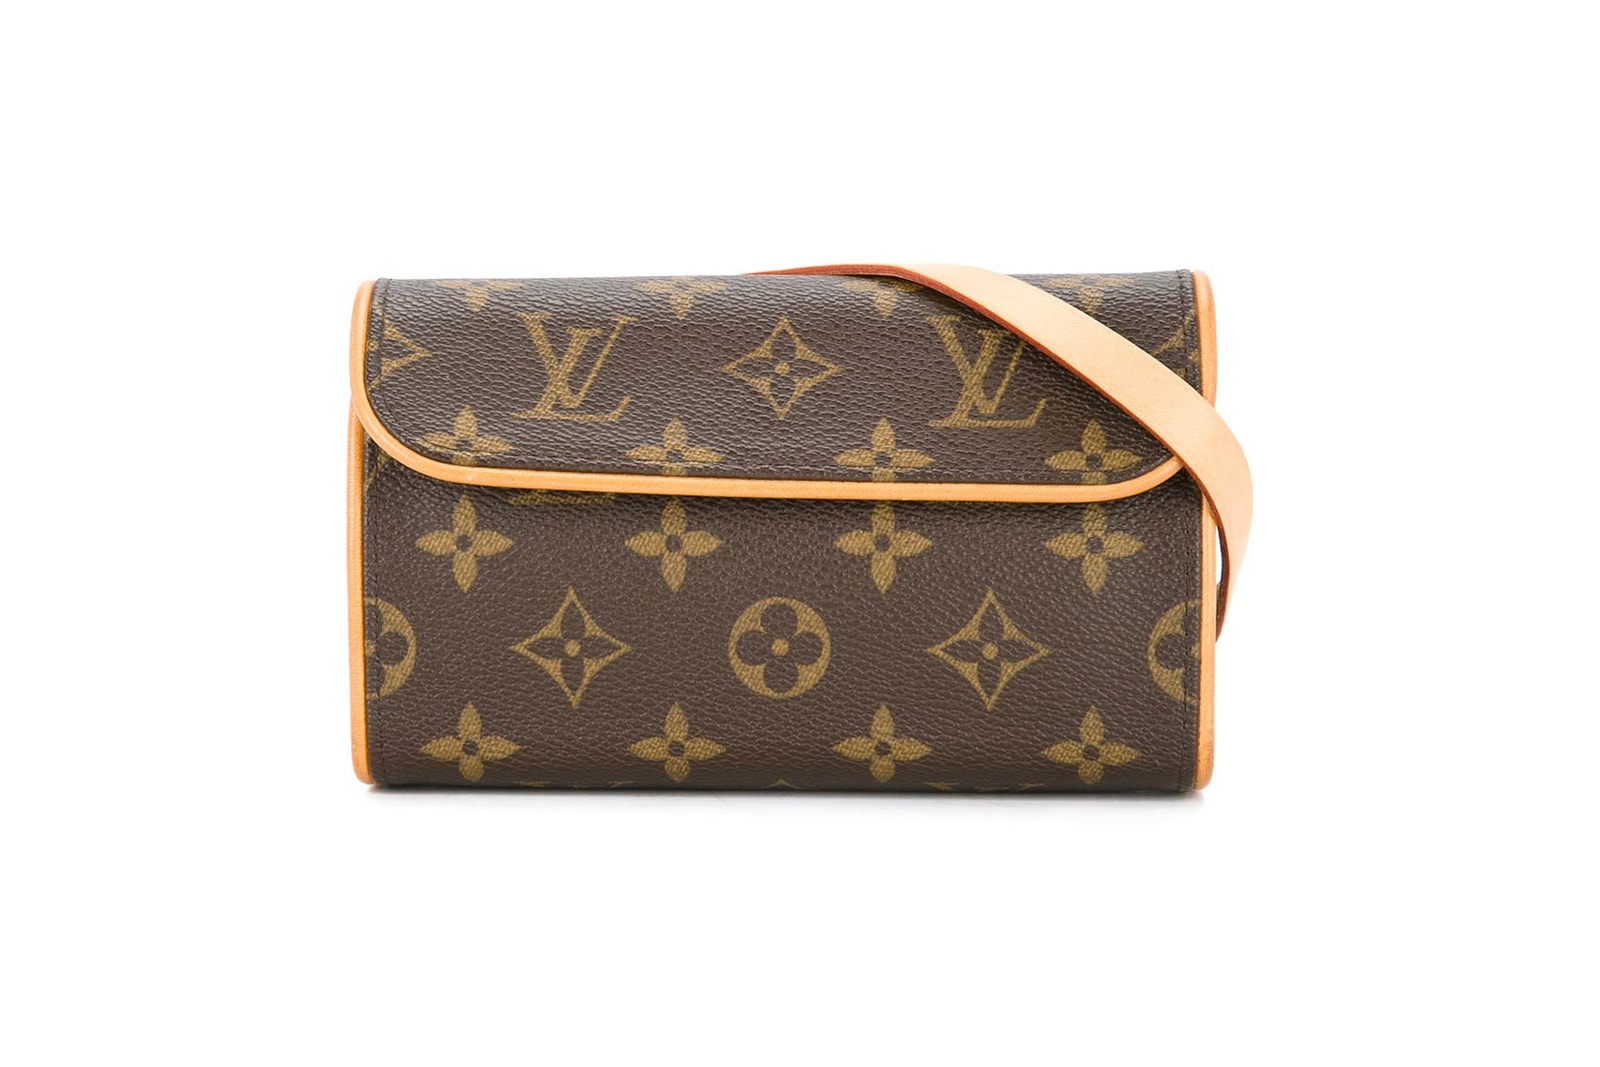 Lv Fanny Pack Dupe | IQS Executive